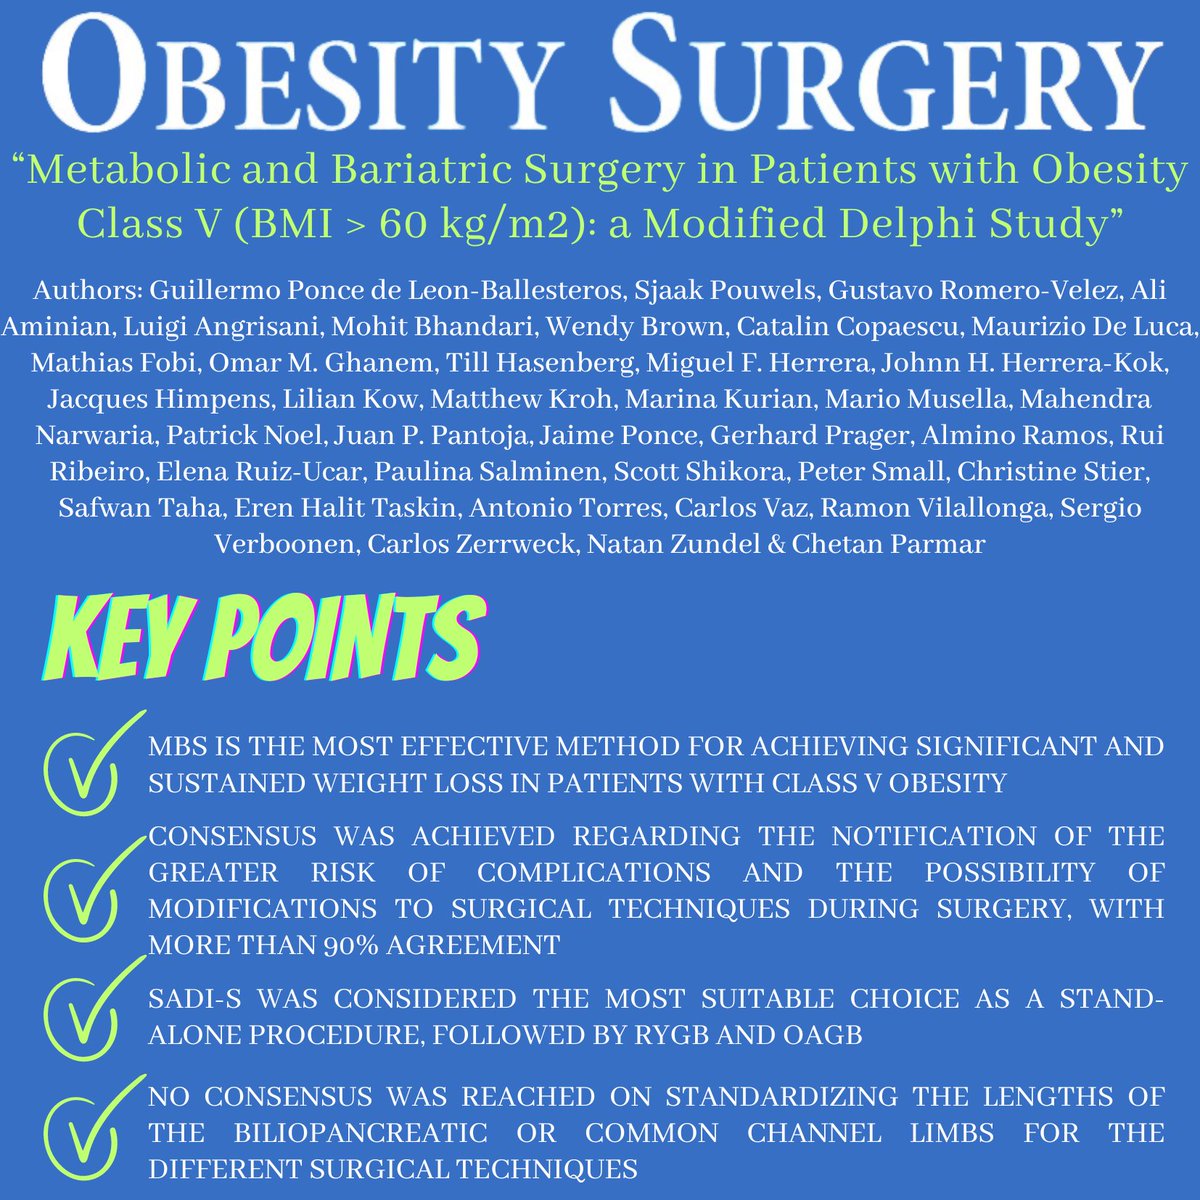 BEST PAPERS MARCH ISSUE: 'Metabolic and Bariatric Surgery in Patients with Obesity Class V (BMI > 60 kg/m2): a Modified Delphi Study' DOI: doi.org/10.1007/s11695… FREE DOWNLOAD: rdcu.be/dBDP9